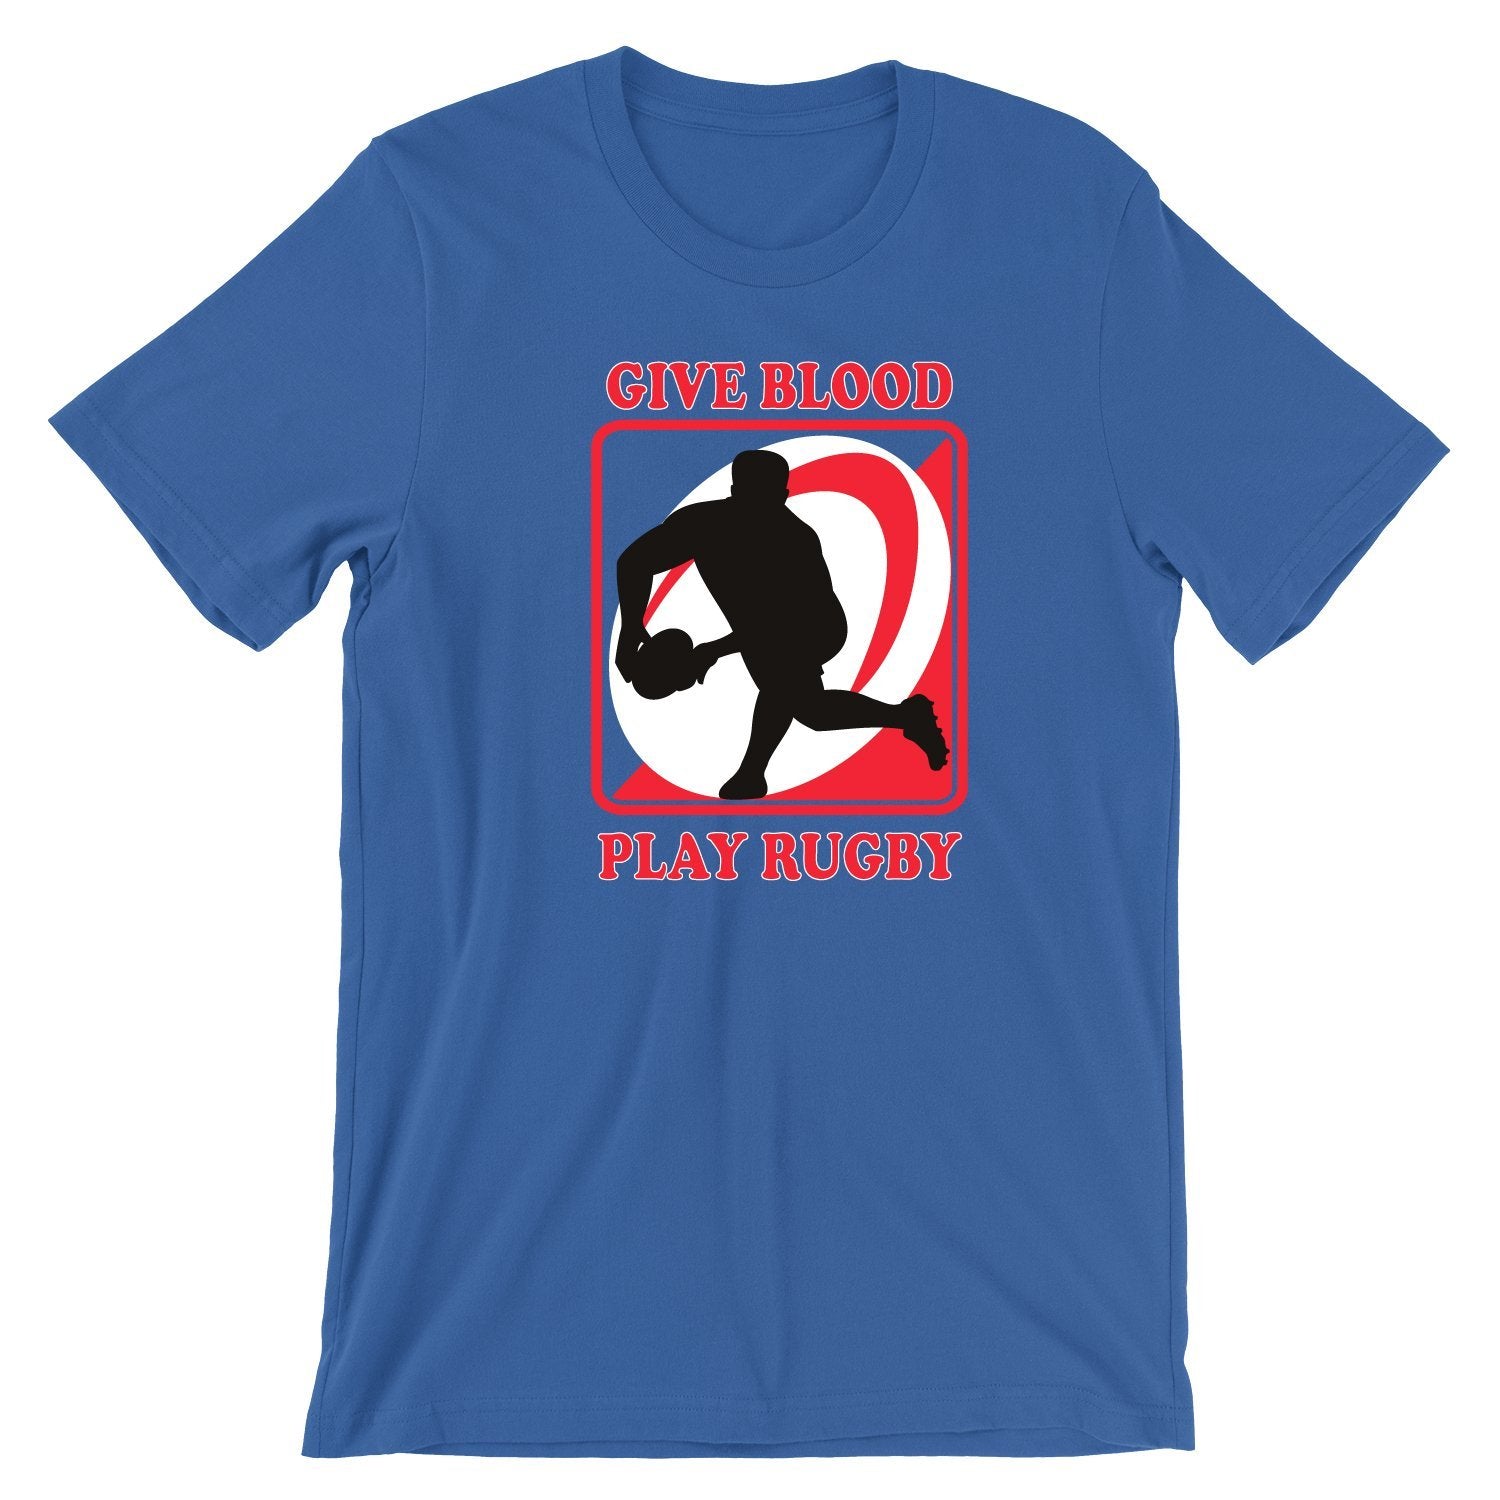 Graphic Tees - Give Blood Play Rugby - Royal